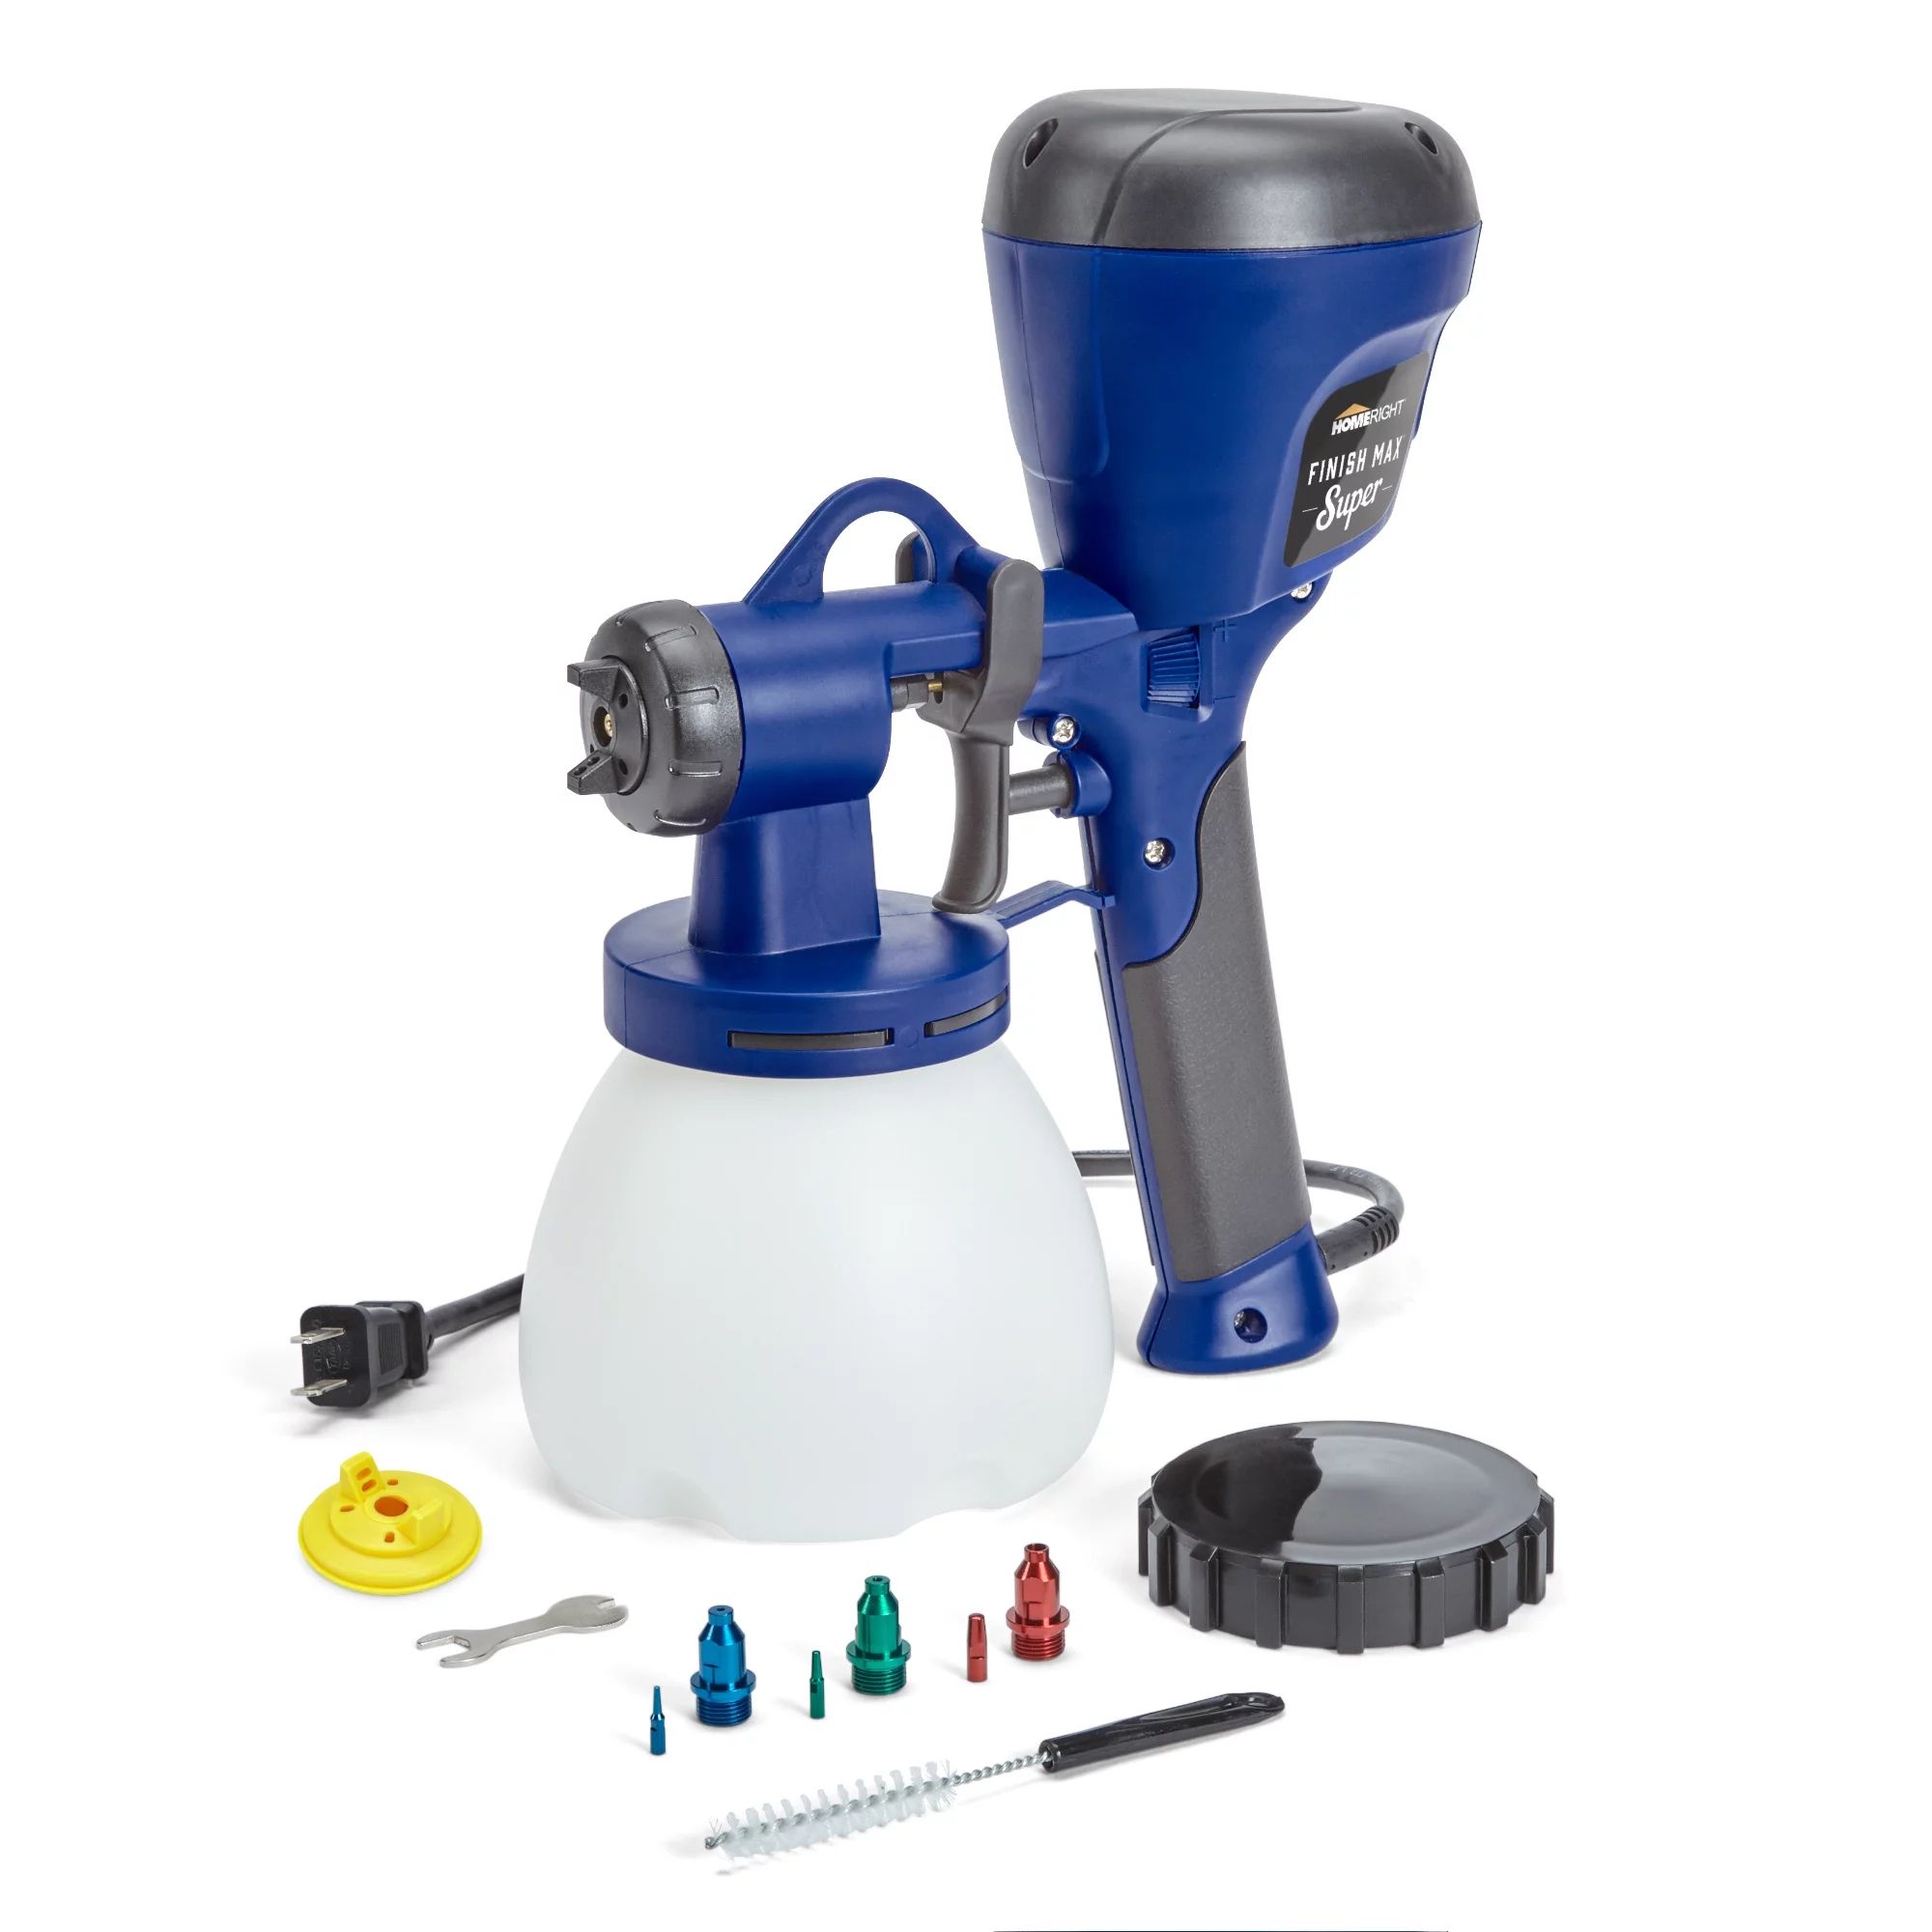 HomeRight Super Finish Max HVLP Paint Sprayer with 3 Spray Tips and 2 Caps | Walmart (US)